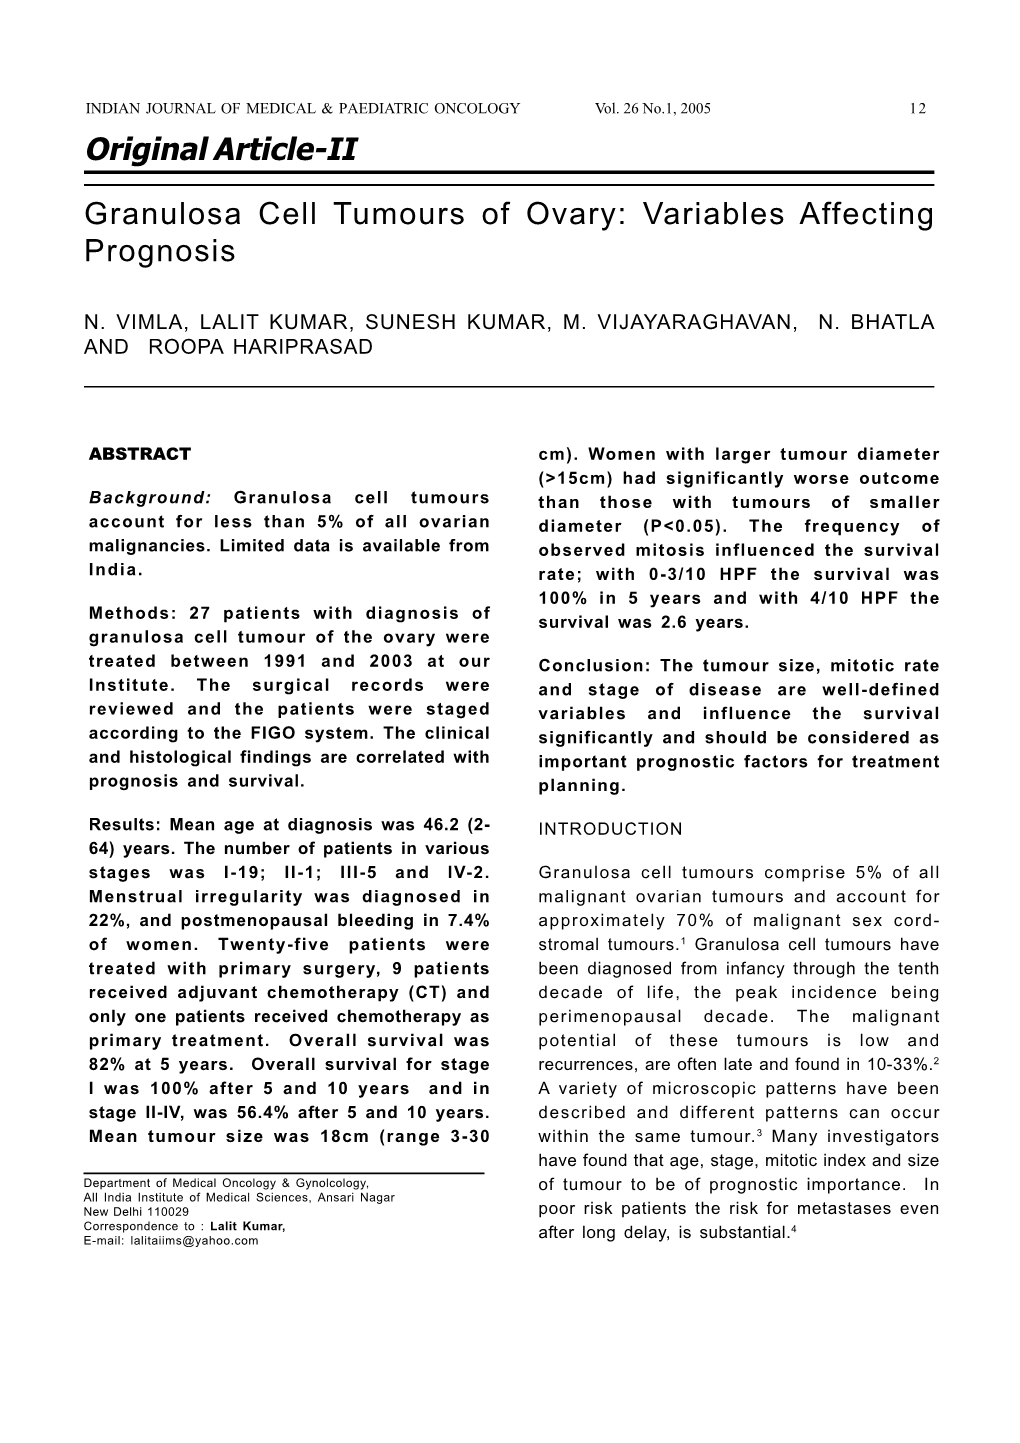 Granulosa Cell Tumours of Ovary: Variables Affecting Prognosis